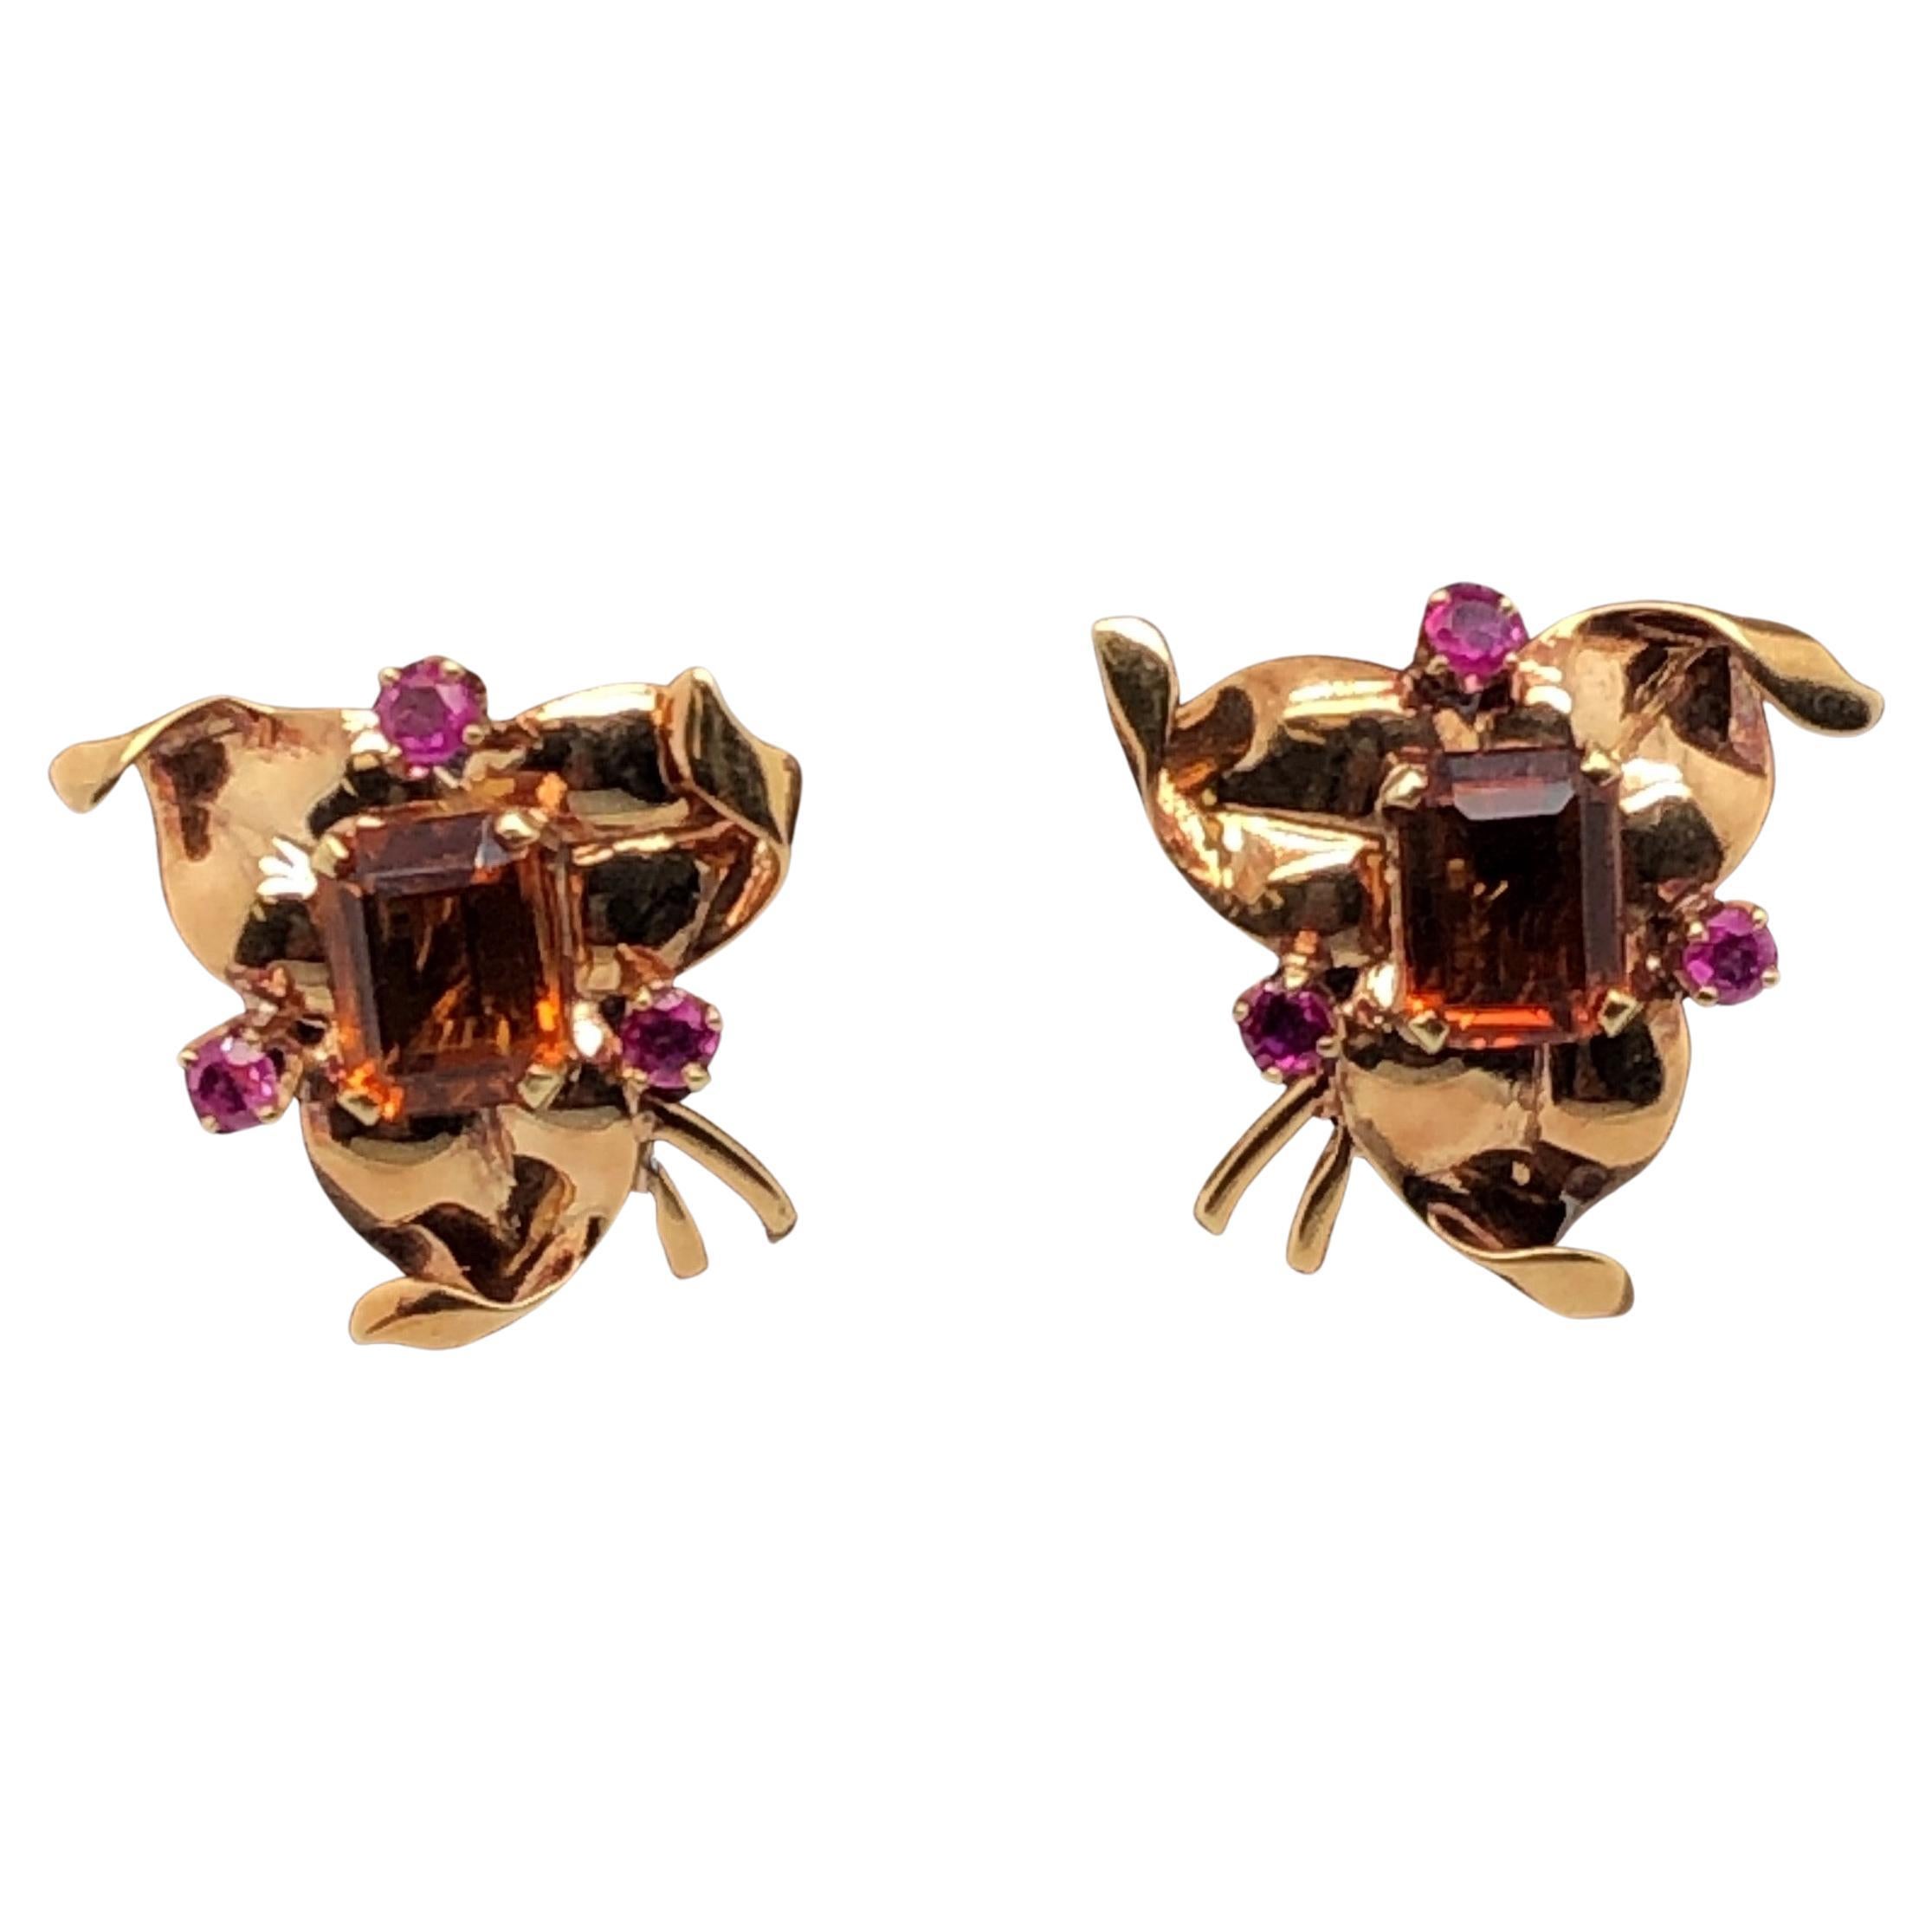 Retro 1940's era Tiffany & Co. screw back earrings with 2.54 total carat weight Citrine and .12 total carat weight Rubies.

The Citrine is 5/16 inch x 3/16 inch.

The earrings are three sided, approx. 7/8 inch on each side.

Tiffany & Co. stamp is